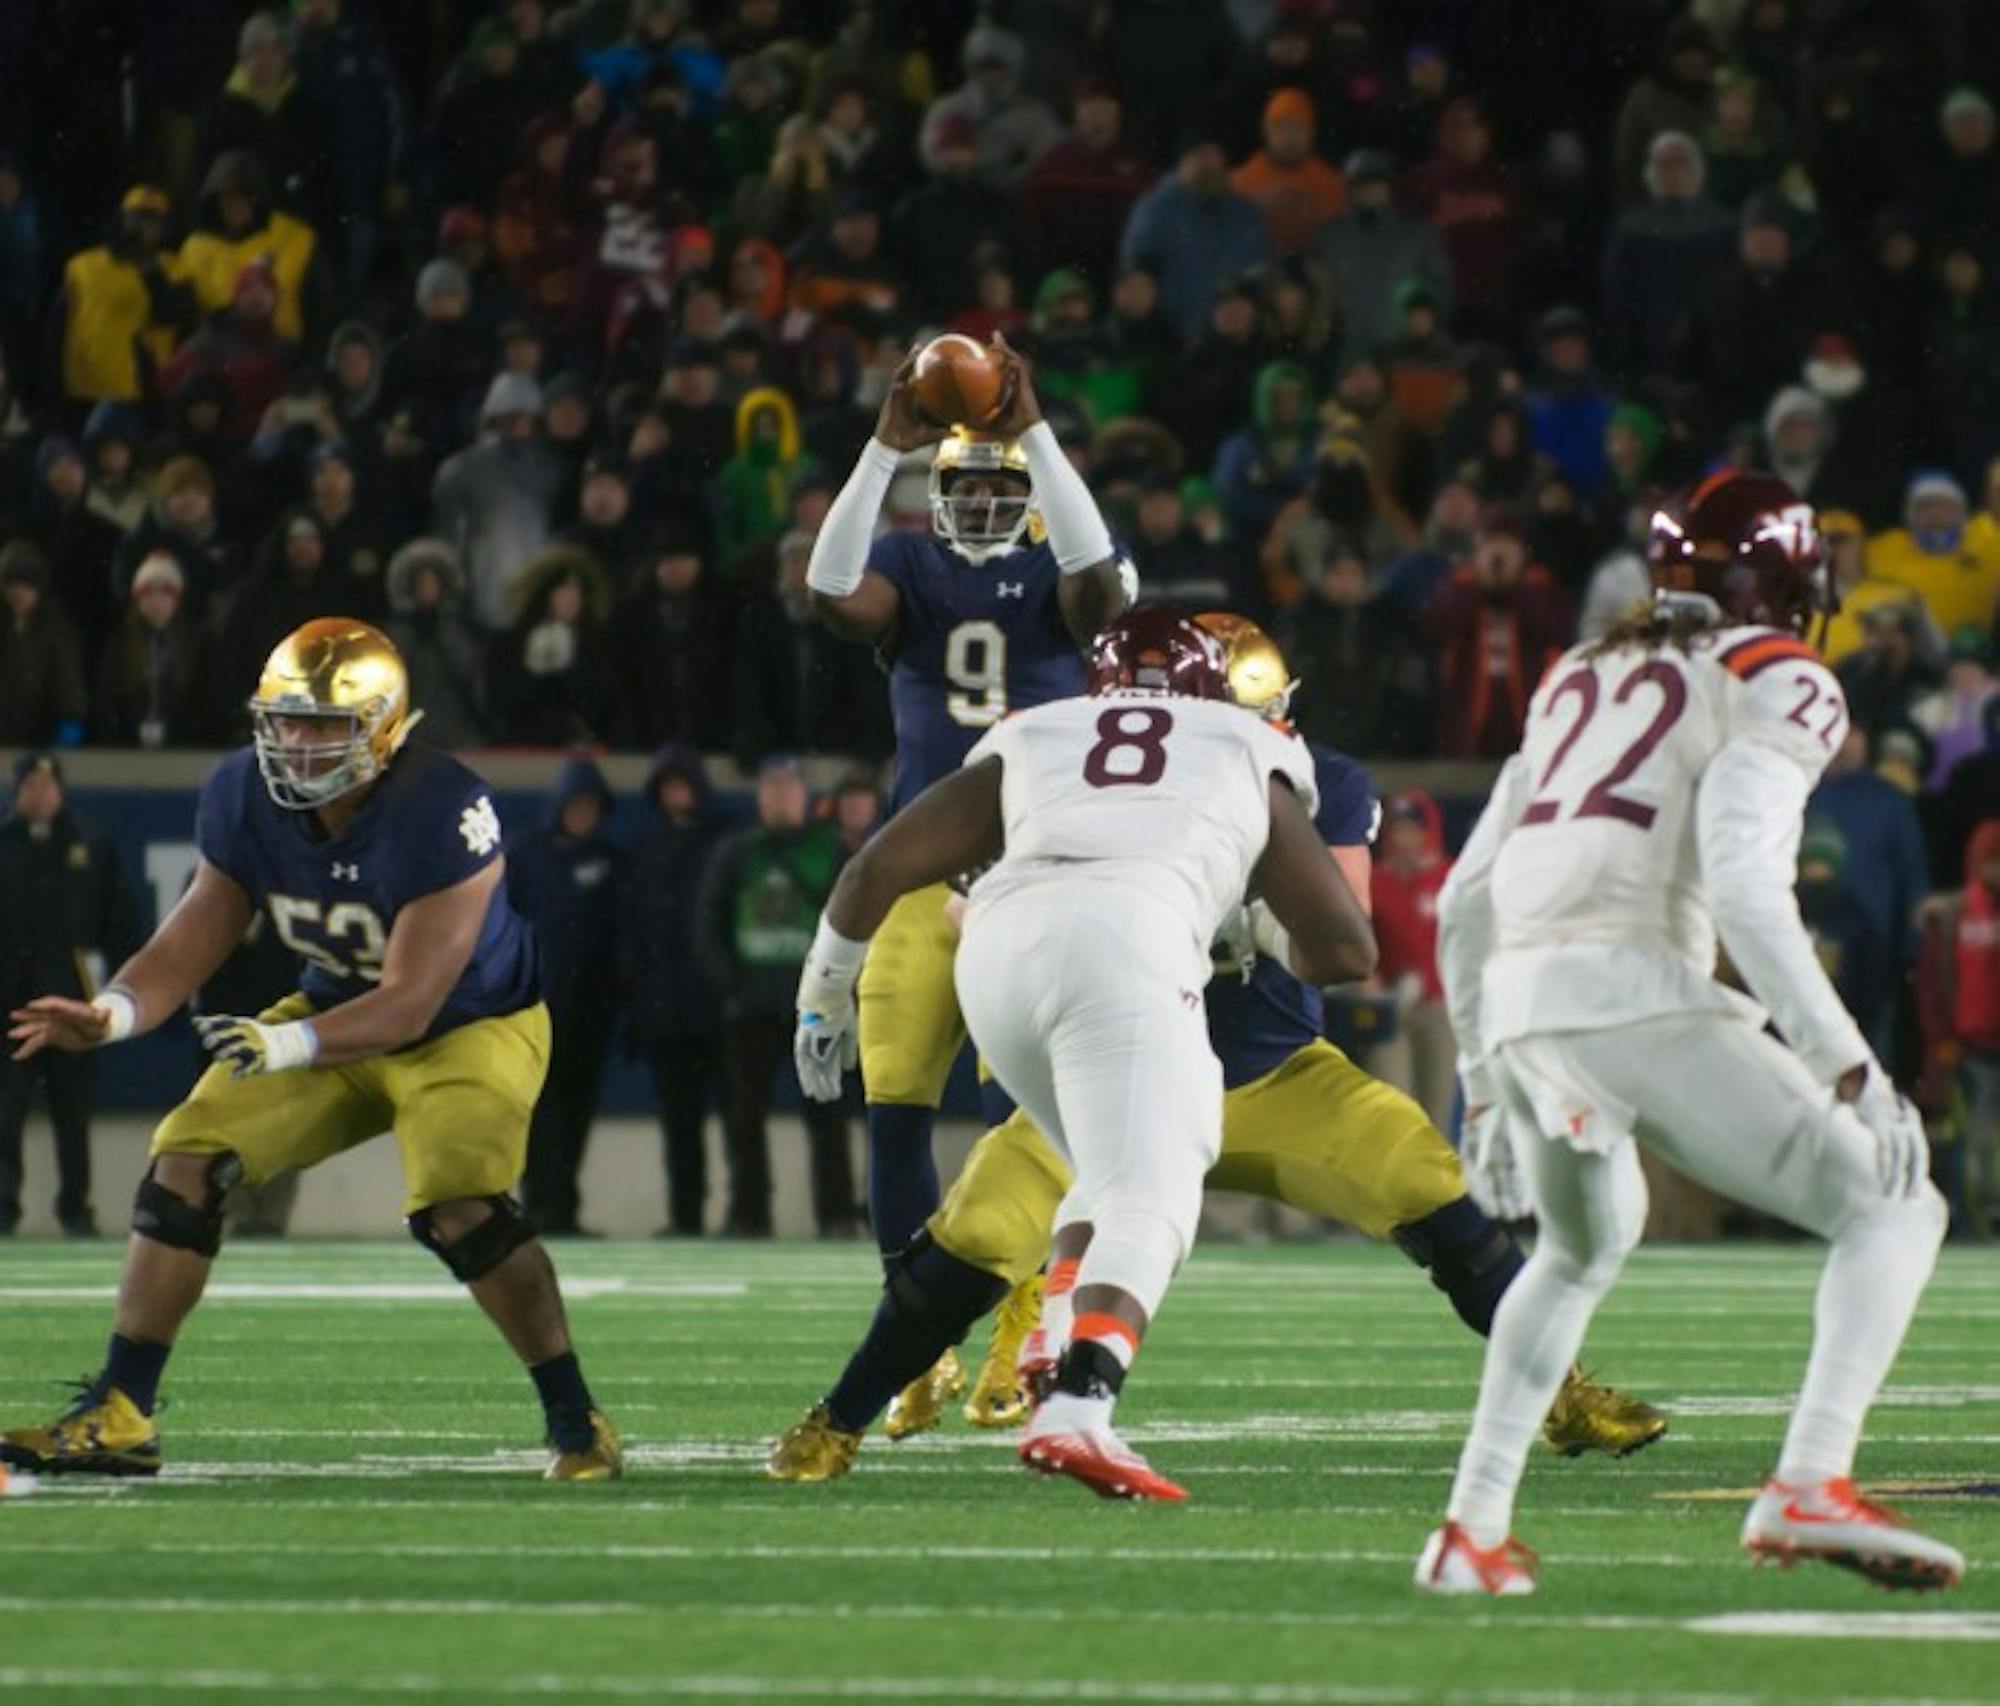 Irish senior quarterback Malik Zaire catches the snap in the final seconds of Notre Dame's 34-31 loss to Virginia Tech.